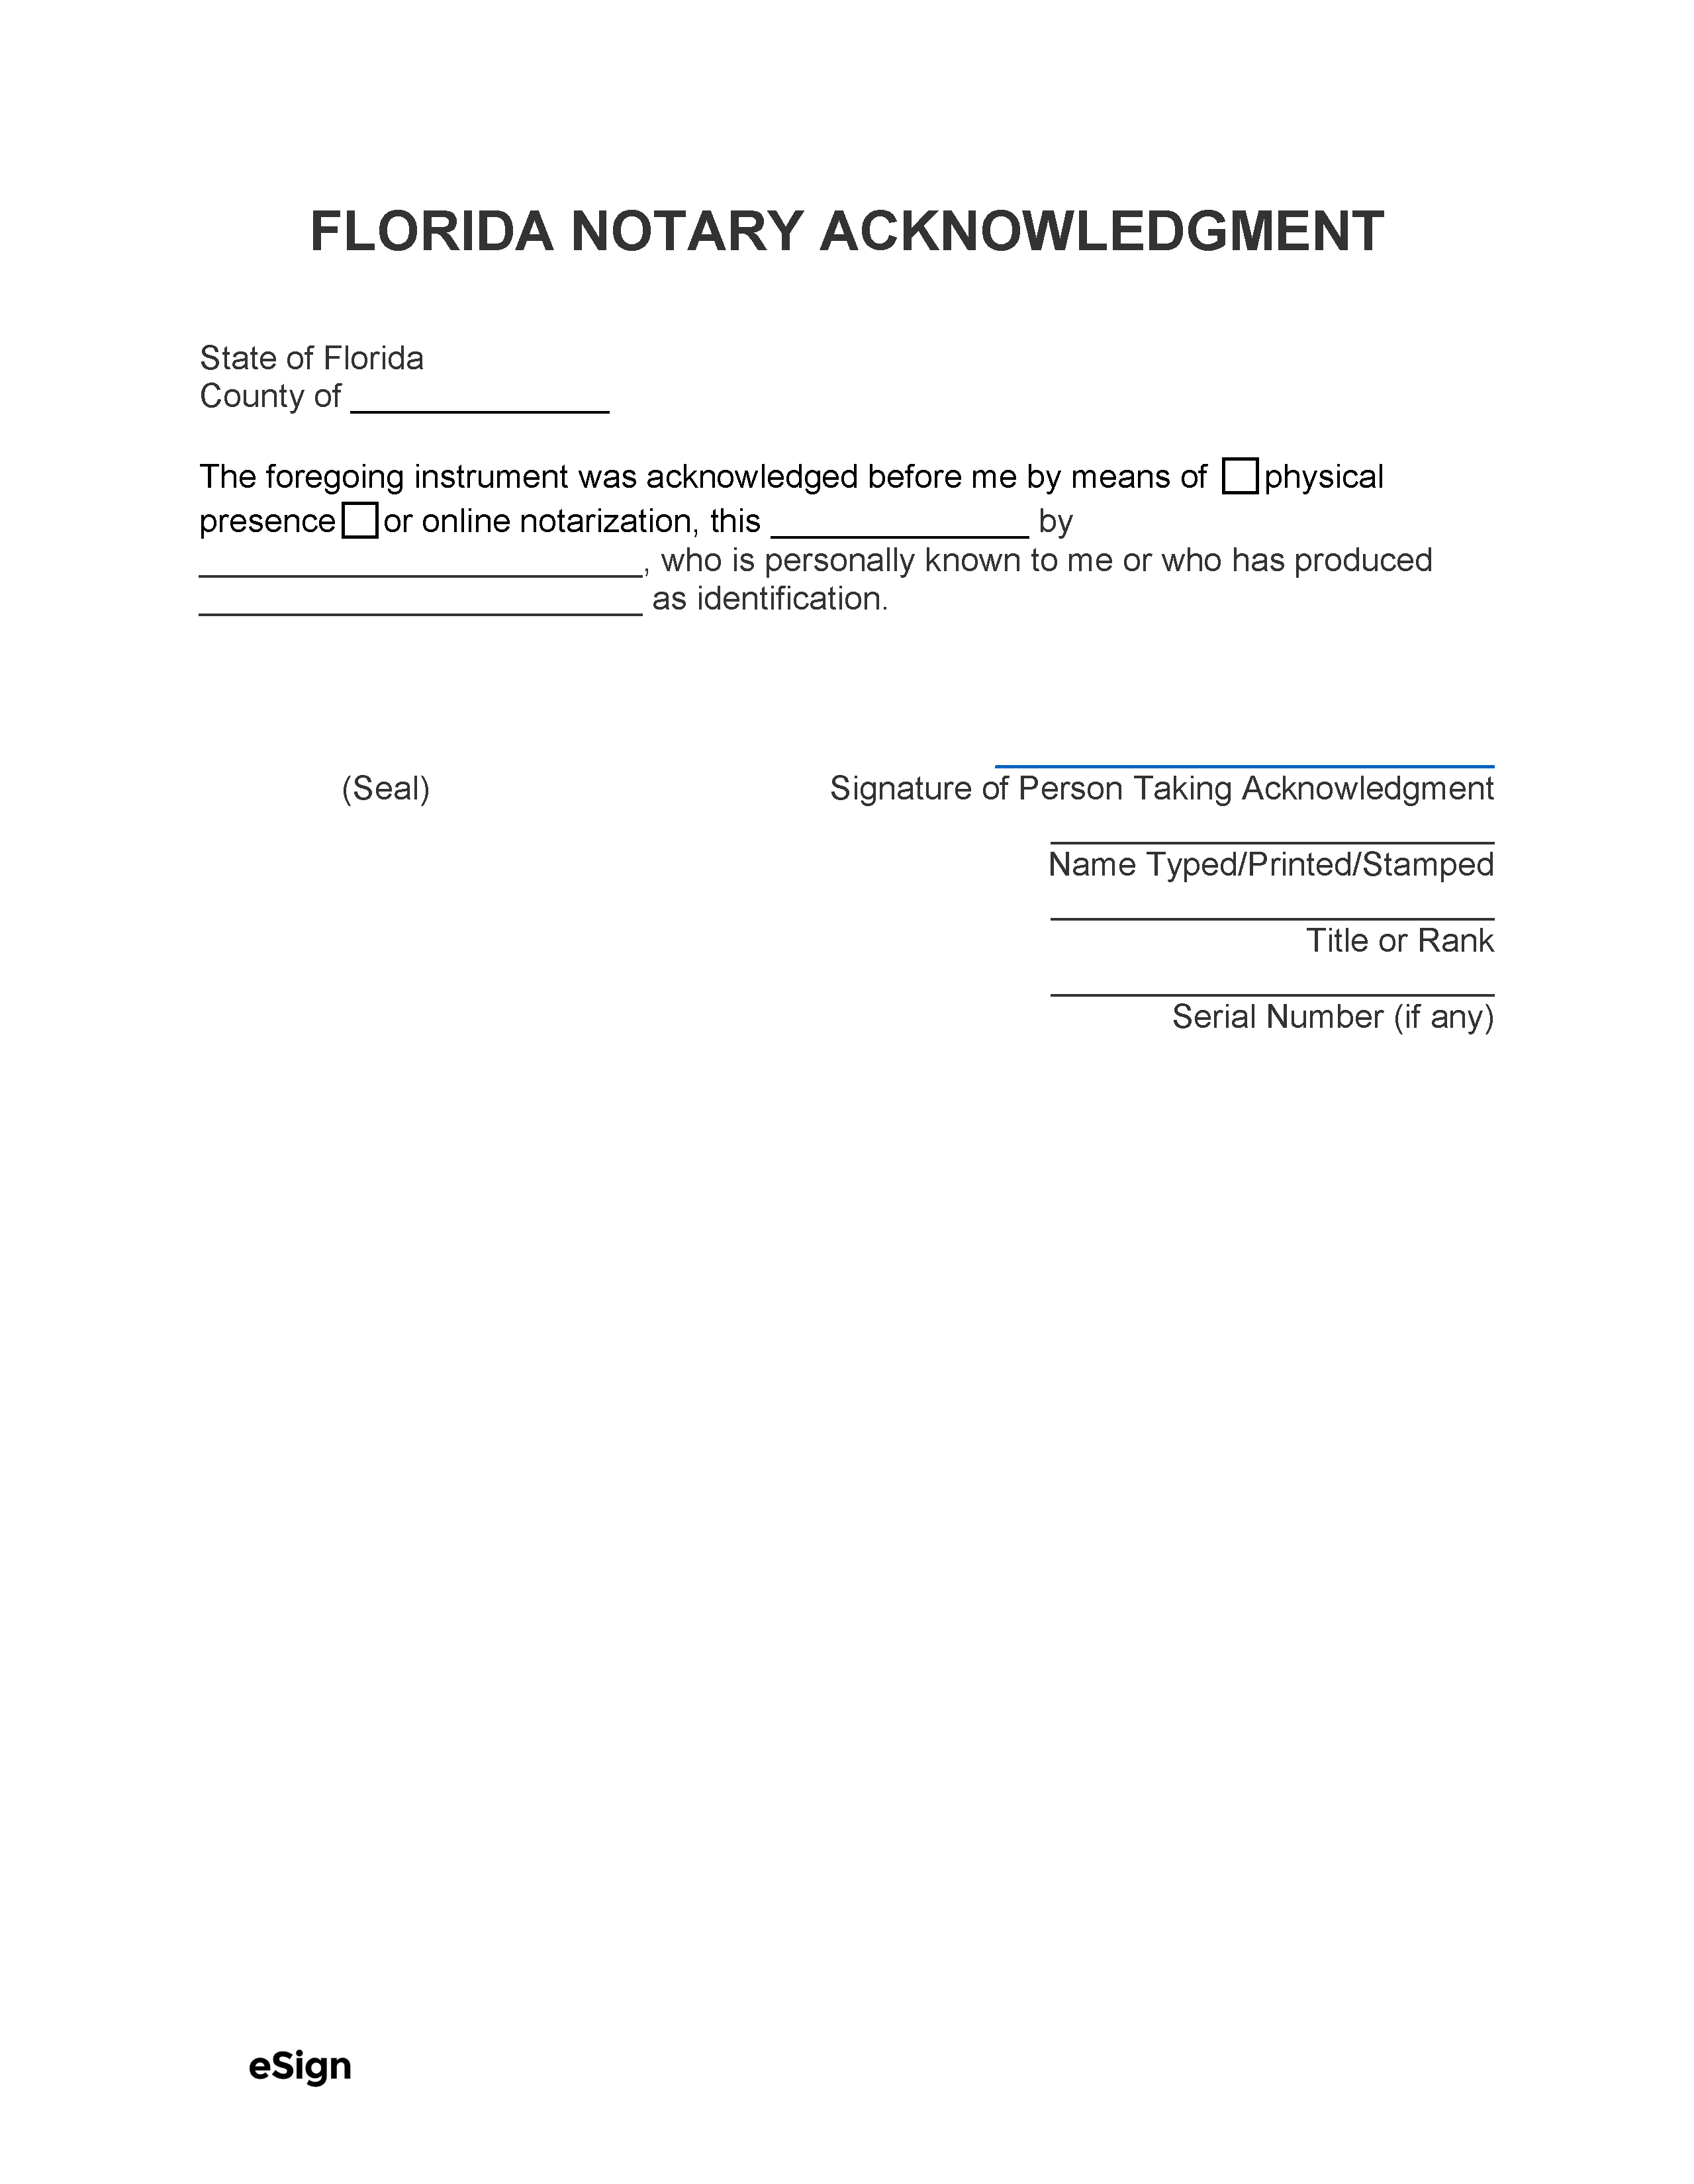 Florida Notary Acknowledgment Form 